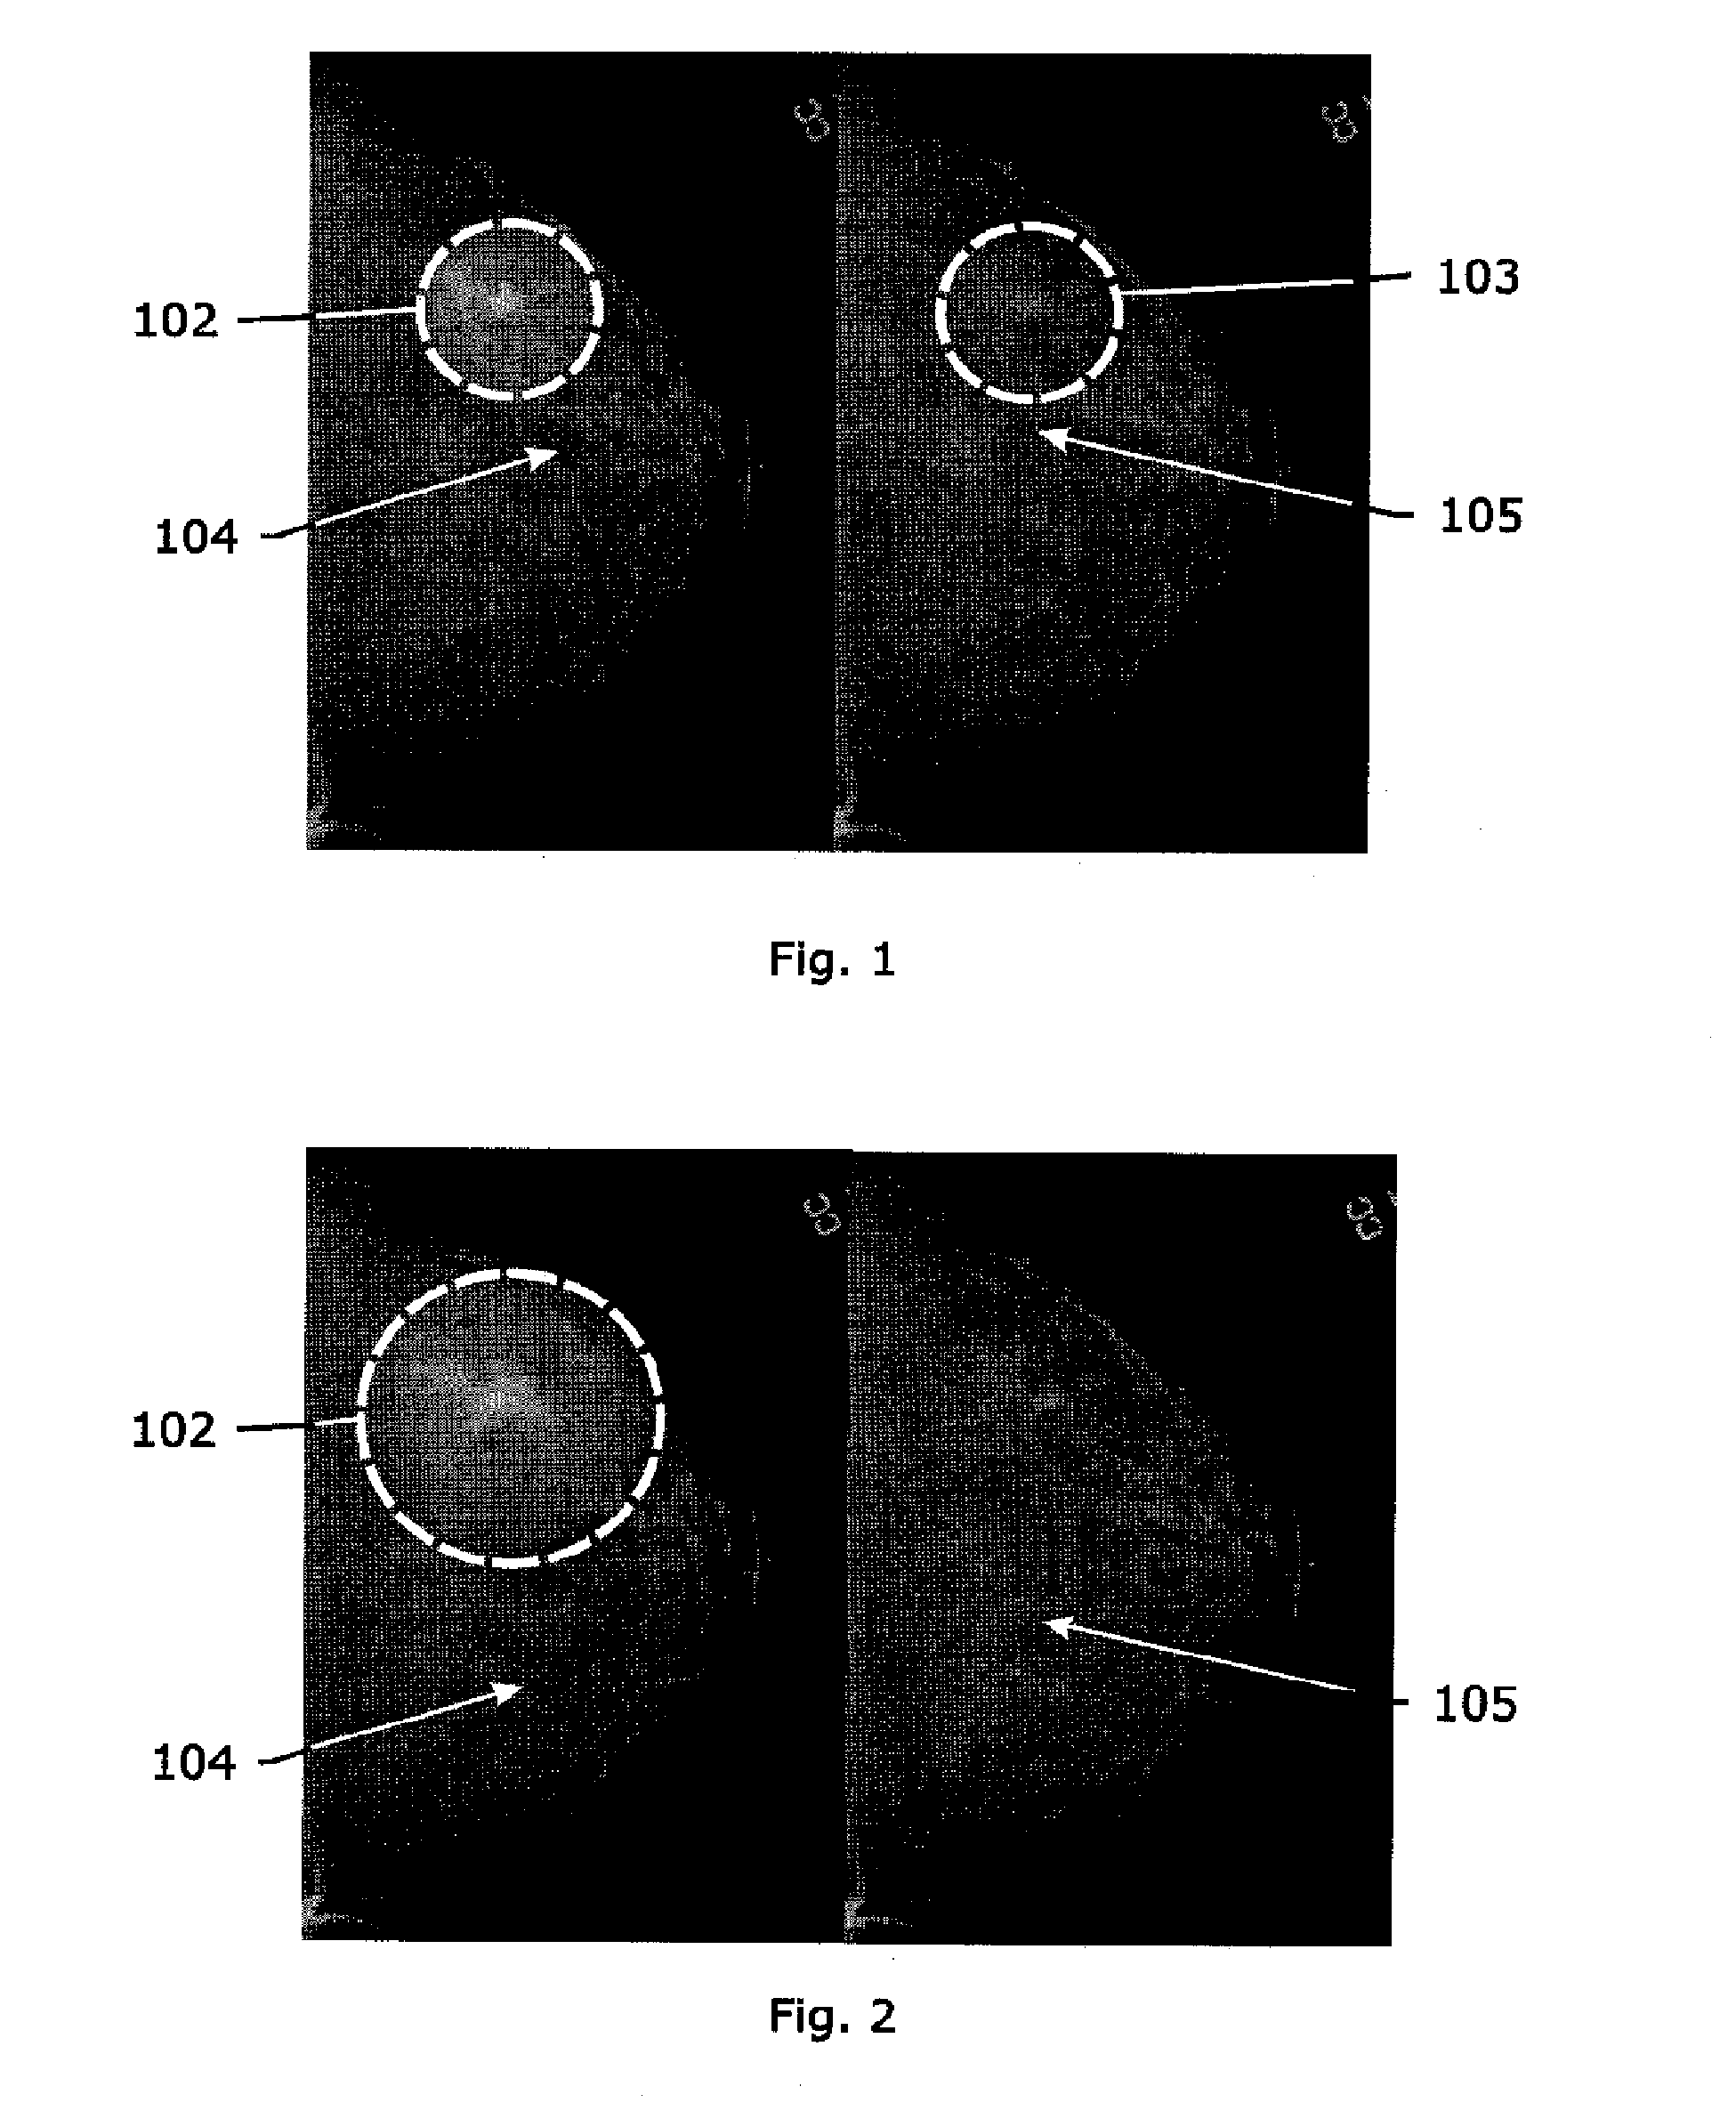 Method and system for improving the visibility of features of an image